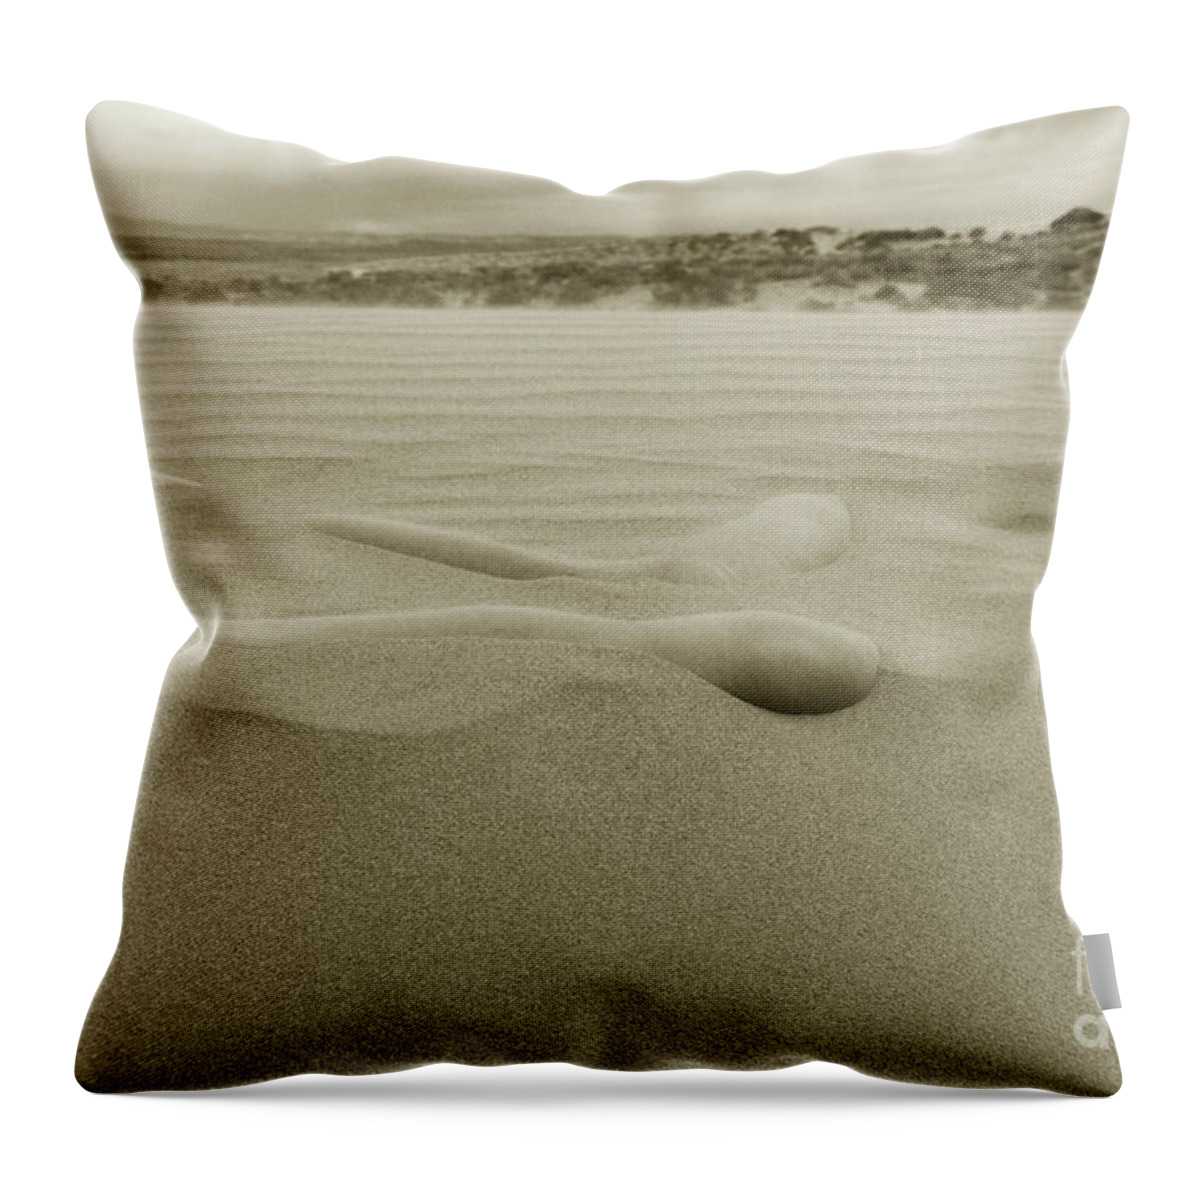 Sand Dunes Throw Pillow featuring the photograph Almost There by Robert WK Clark